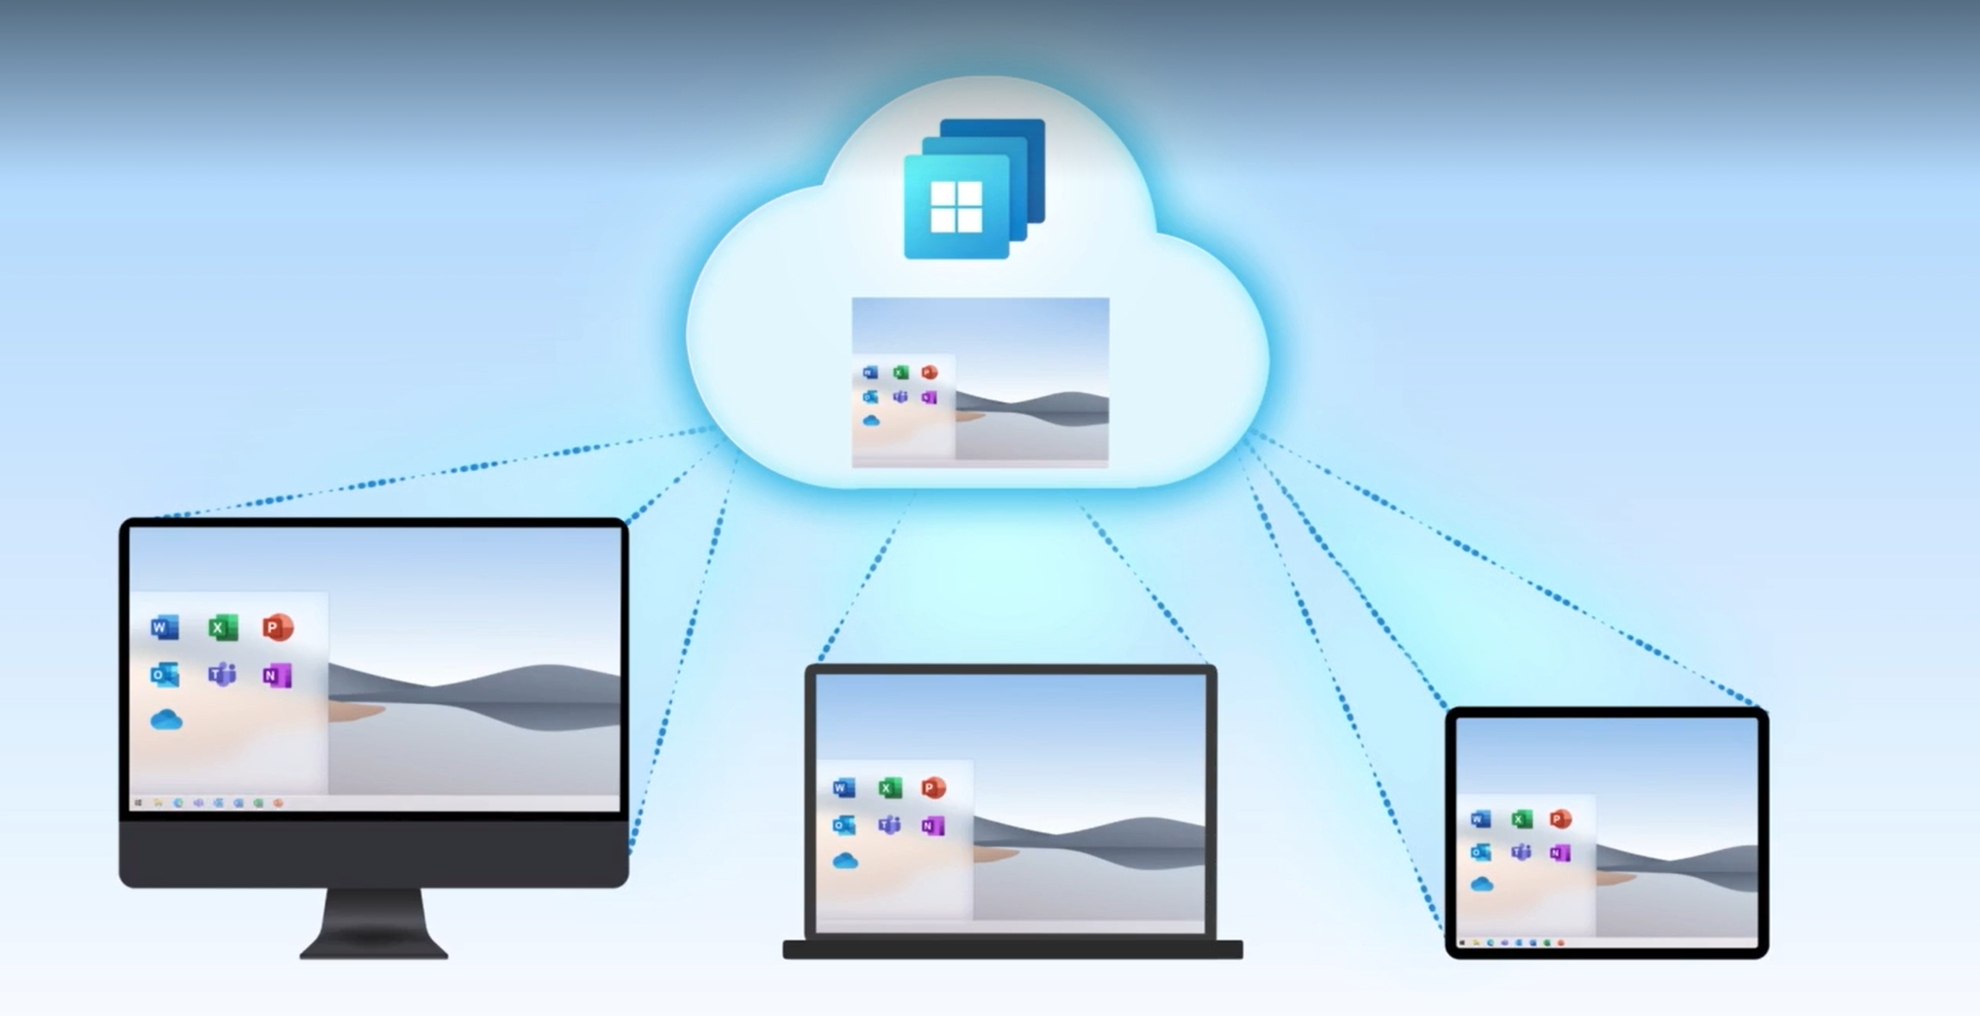 The Microsoft Windows logo and Windows background image in a cloud. Lines from the cloud go to three devices: A desktop, laptop and tablet. The same Windows background image in the cloud is on the screen of each device.